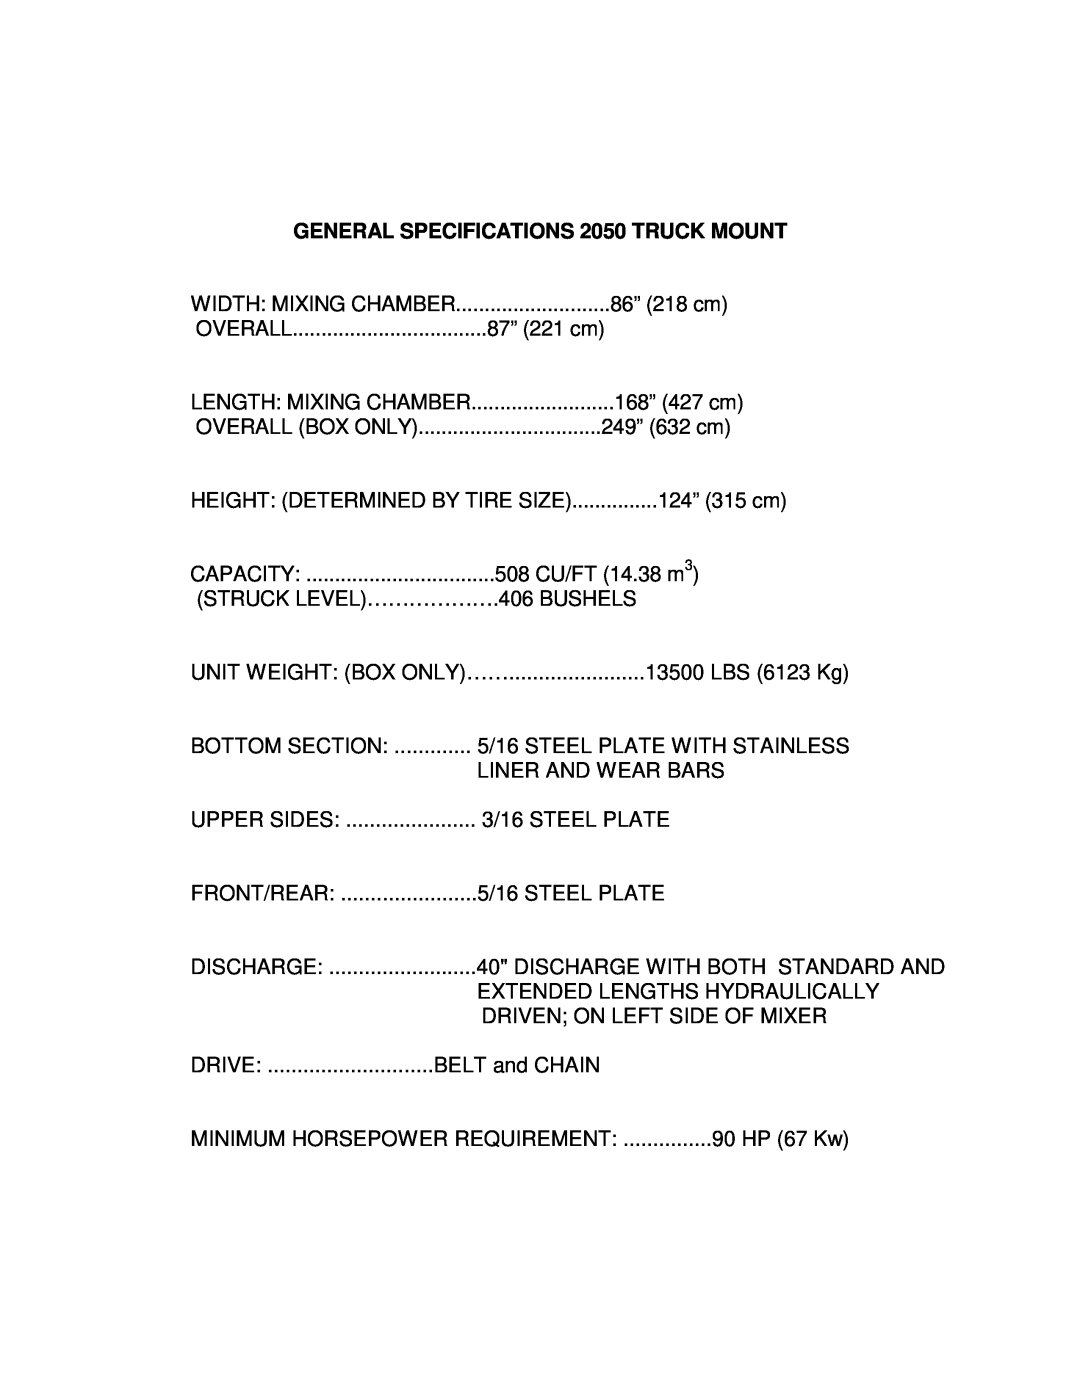 Sioux Tools manual GENERAL SPECIFICATIONS 2050 TRUCK MOUNT 